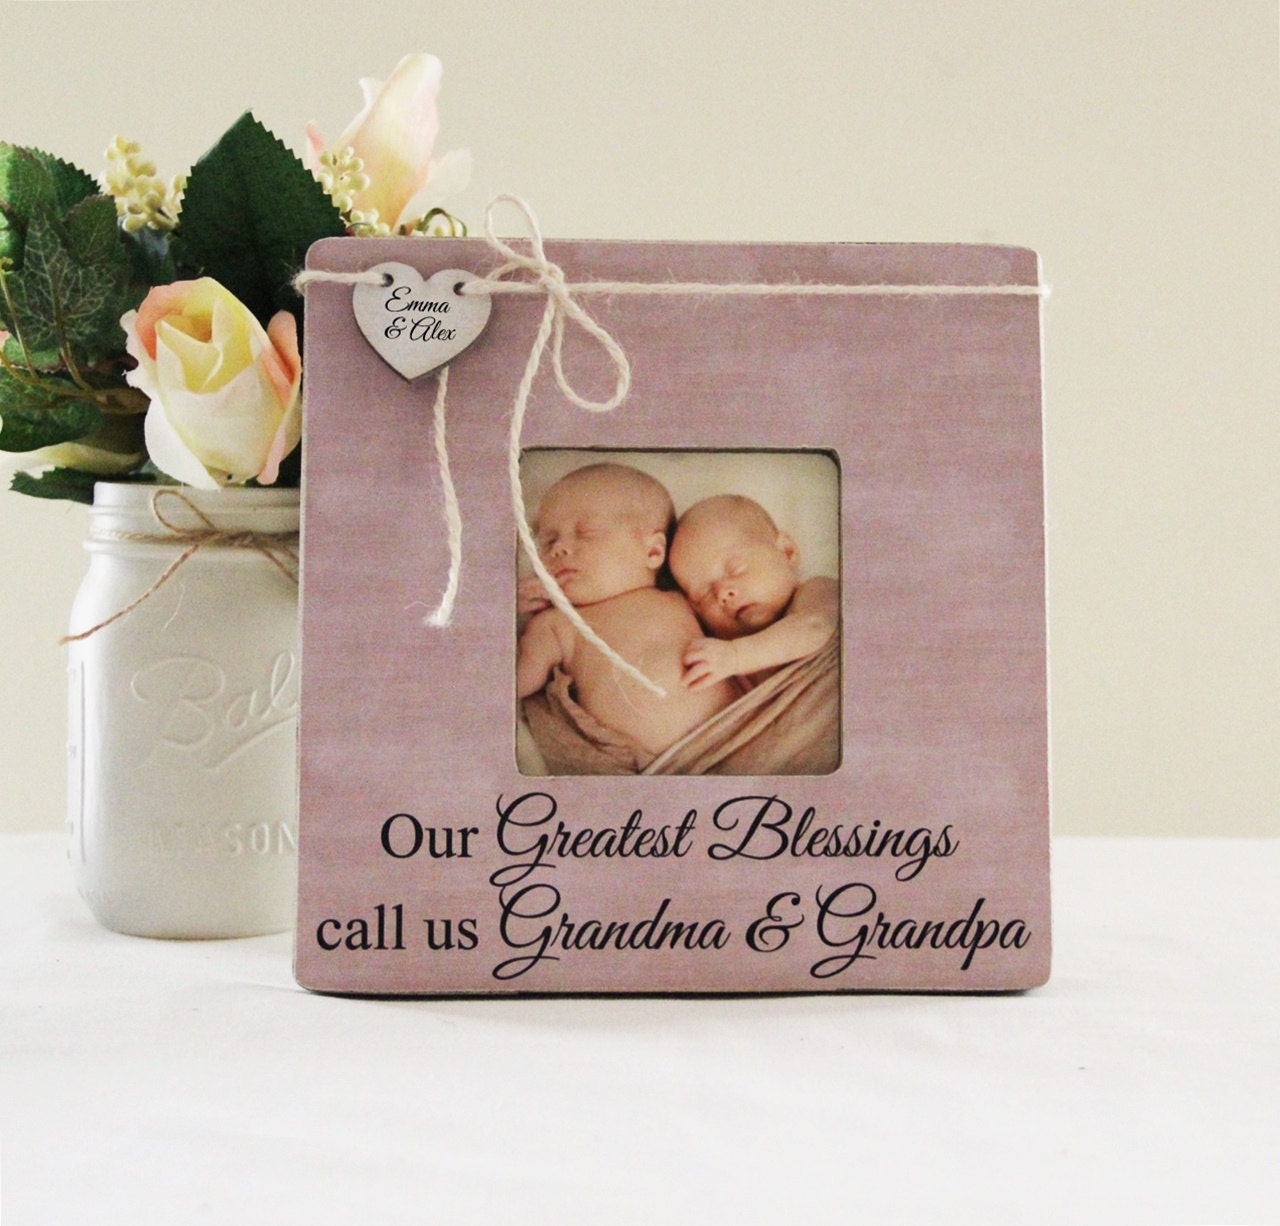 Our Greatest Blessings Picture Frame, Gift For Grandparents, Grandma & Grandpa Gift, Personalized Grandparent